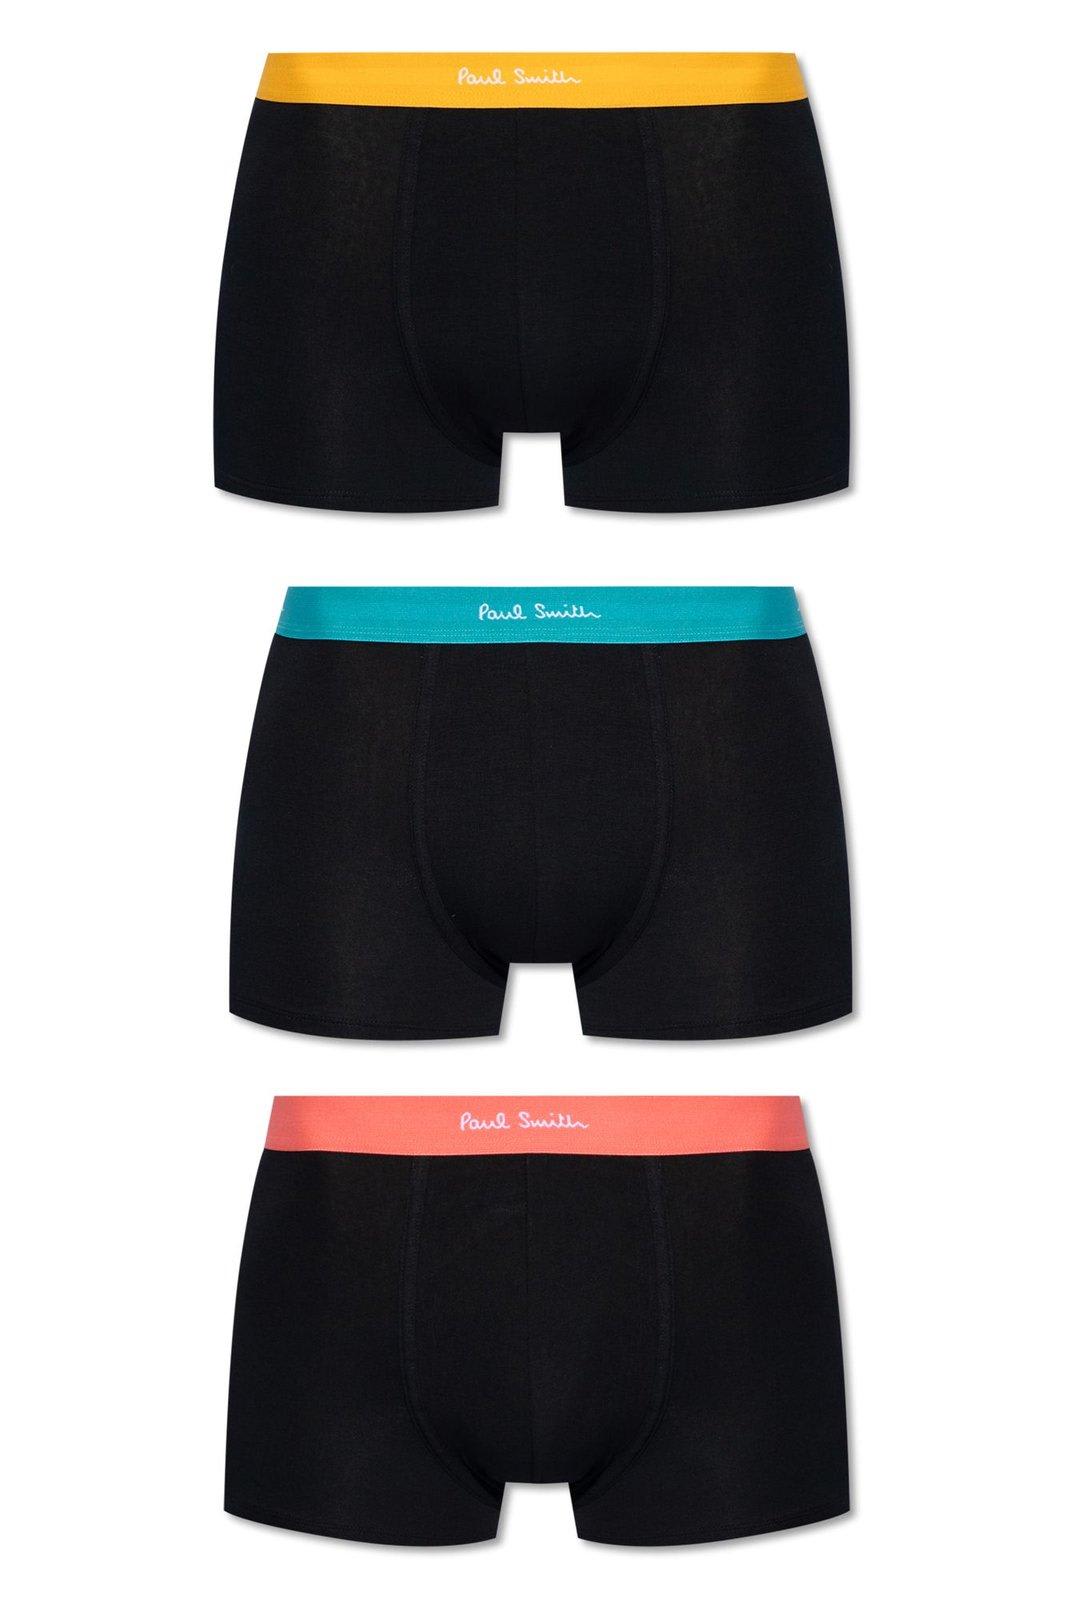 Paul Smith Boxers Three Pack In Black